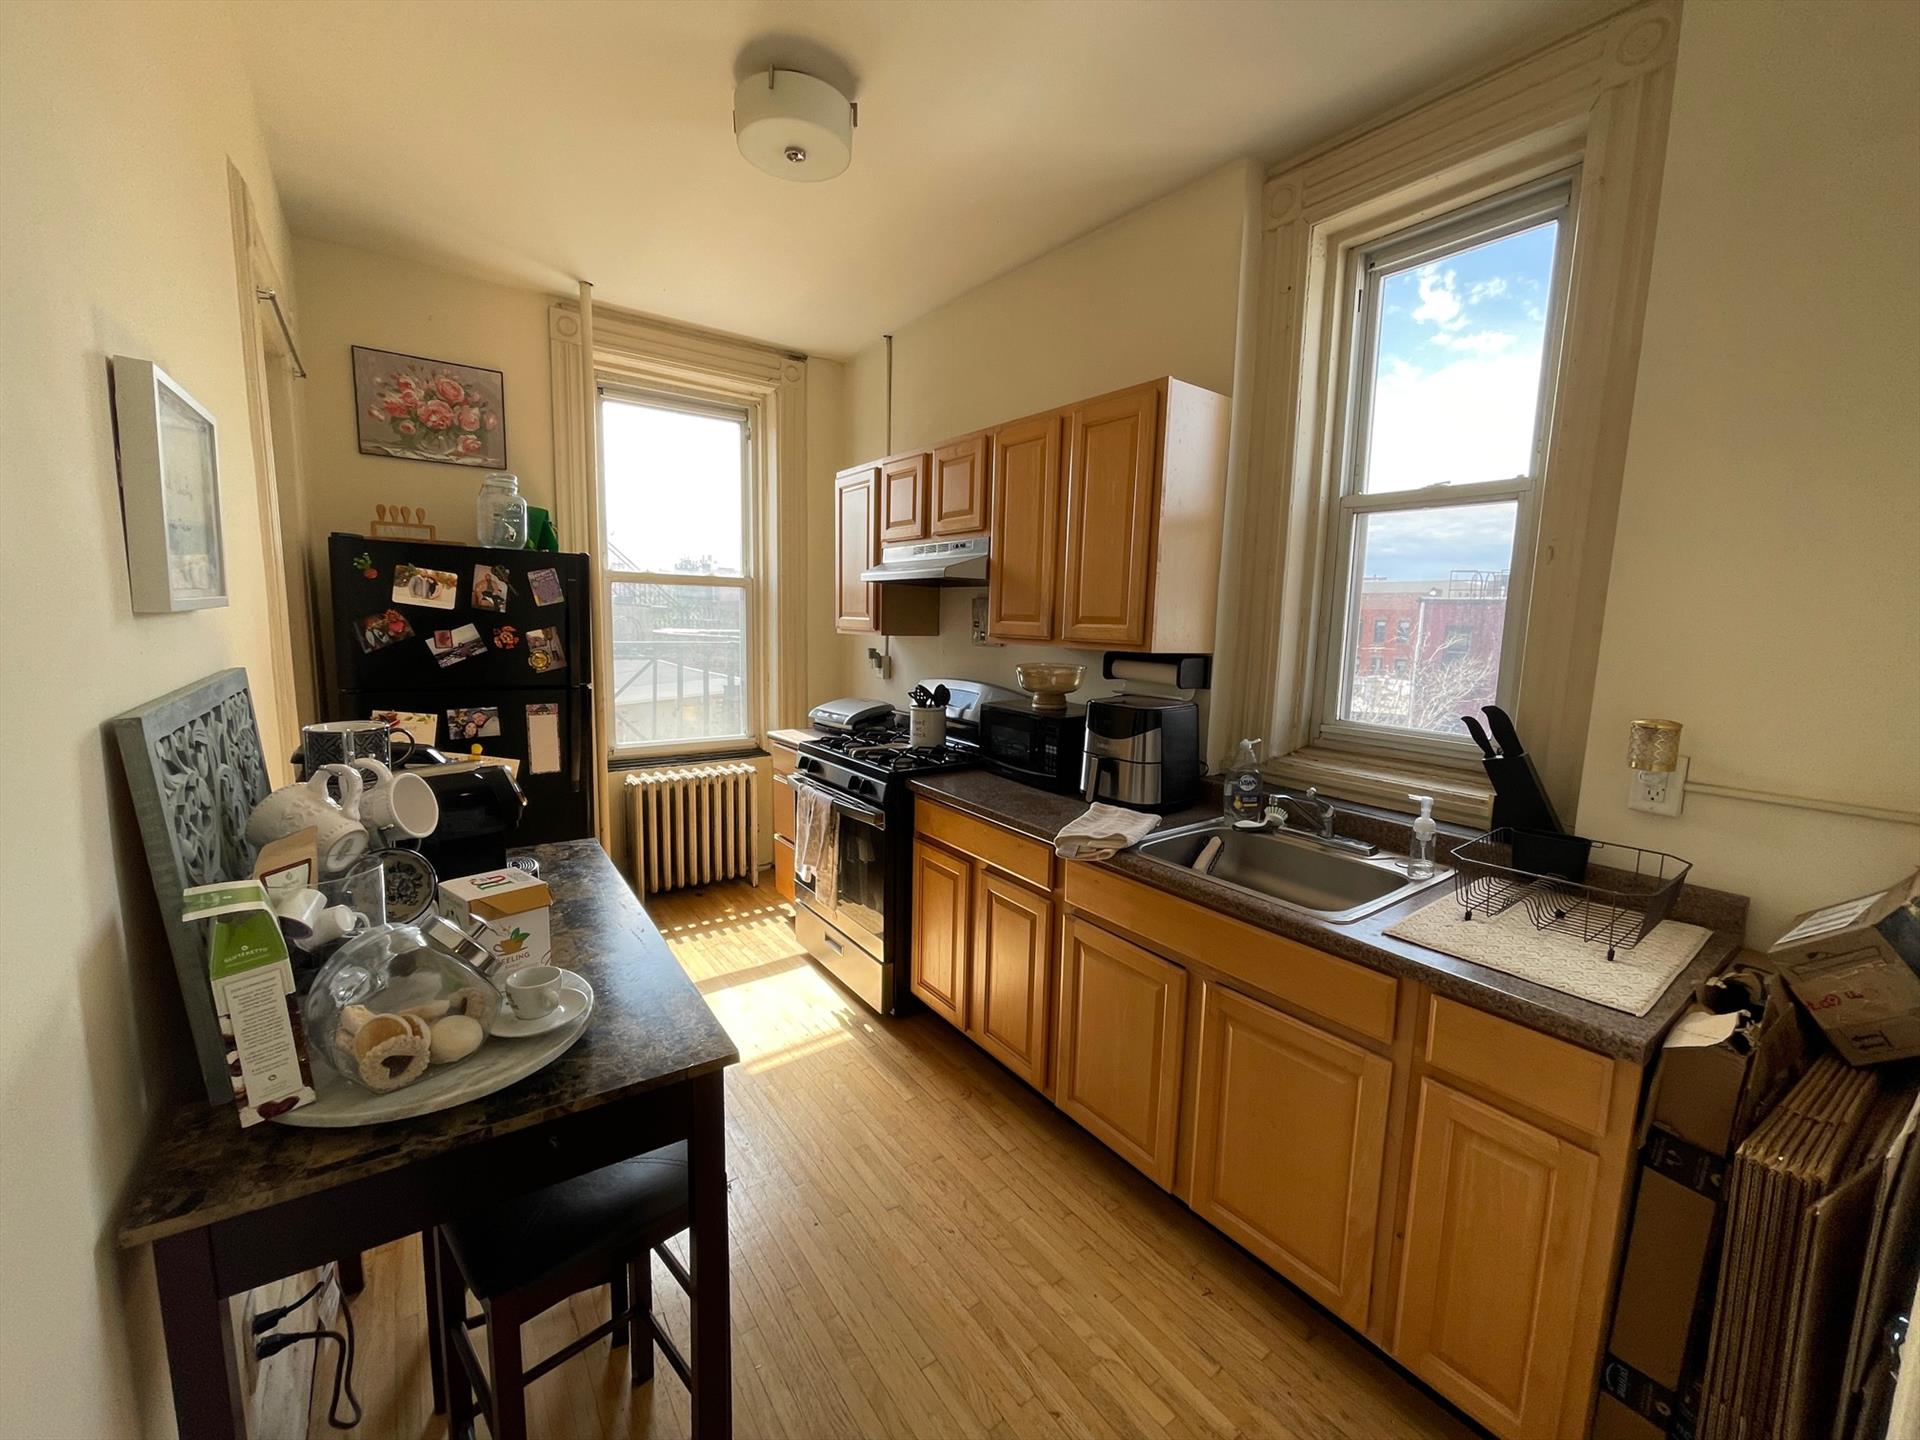 Amazing 1200 sq foot 1-2 bedroom apartment. This home features tons of natural light, endless amounts of closet space and a great layout. Could be used as a one bedroom or a two bedroom with installation of a door. Total of 5 rooms! Available June 1st.